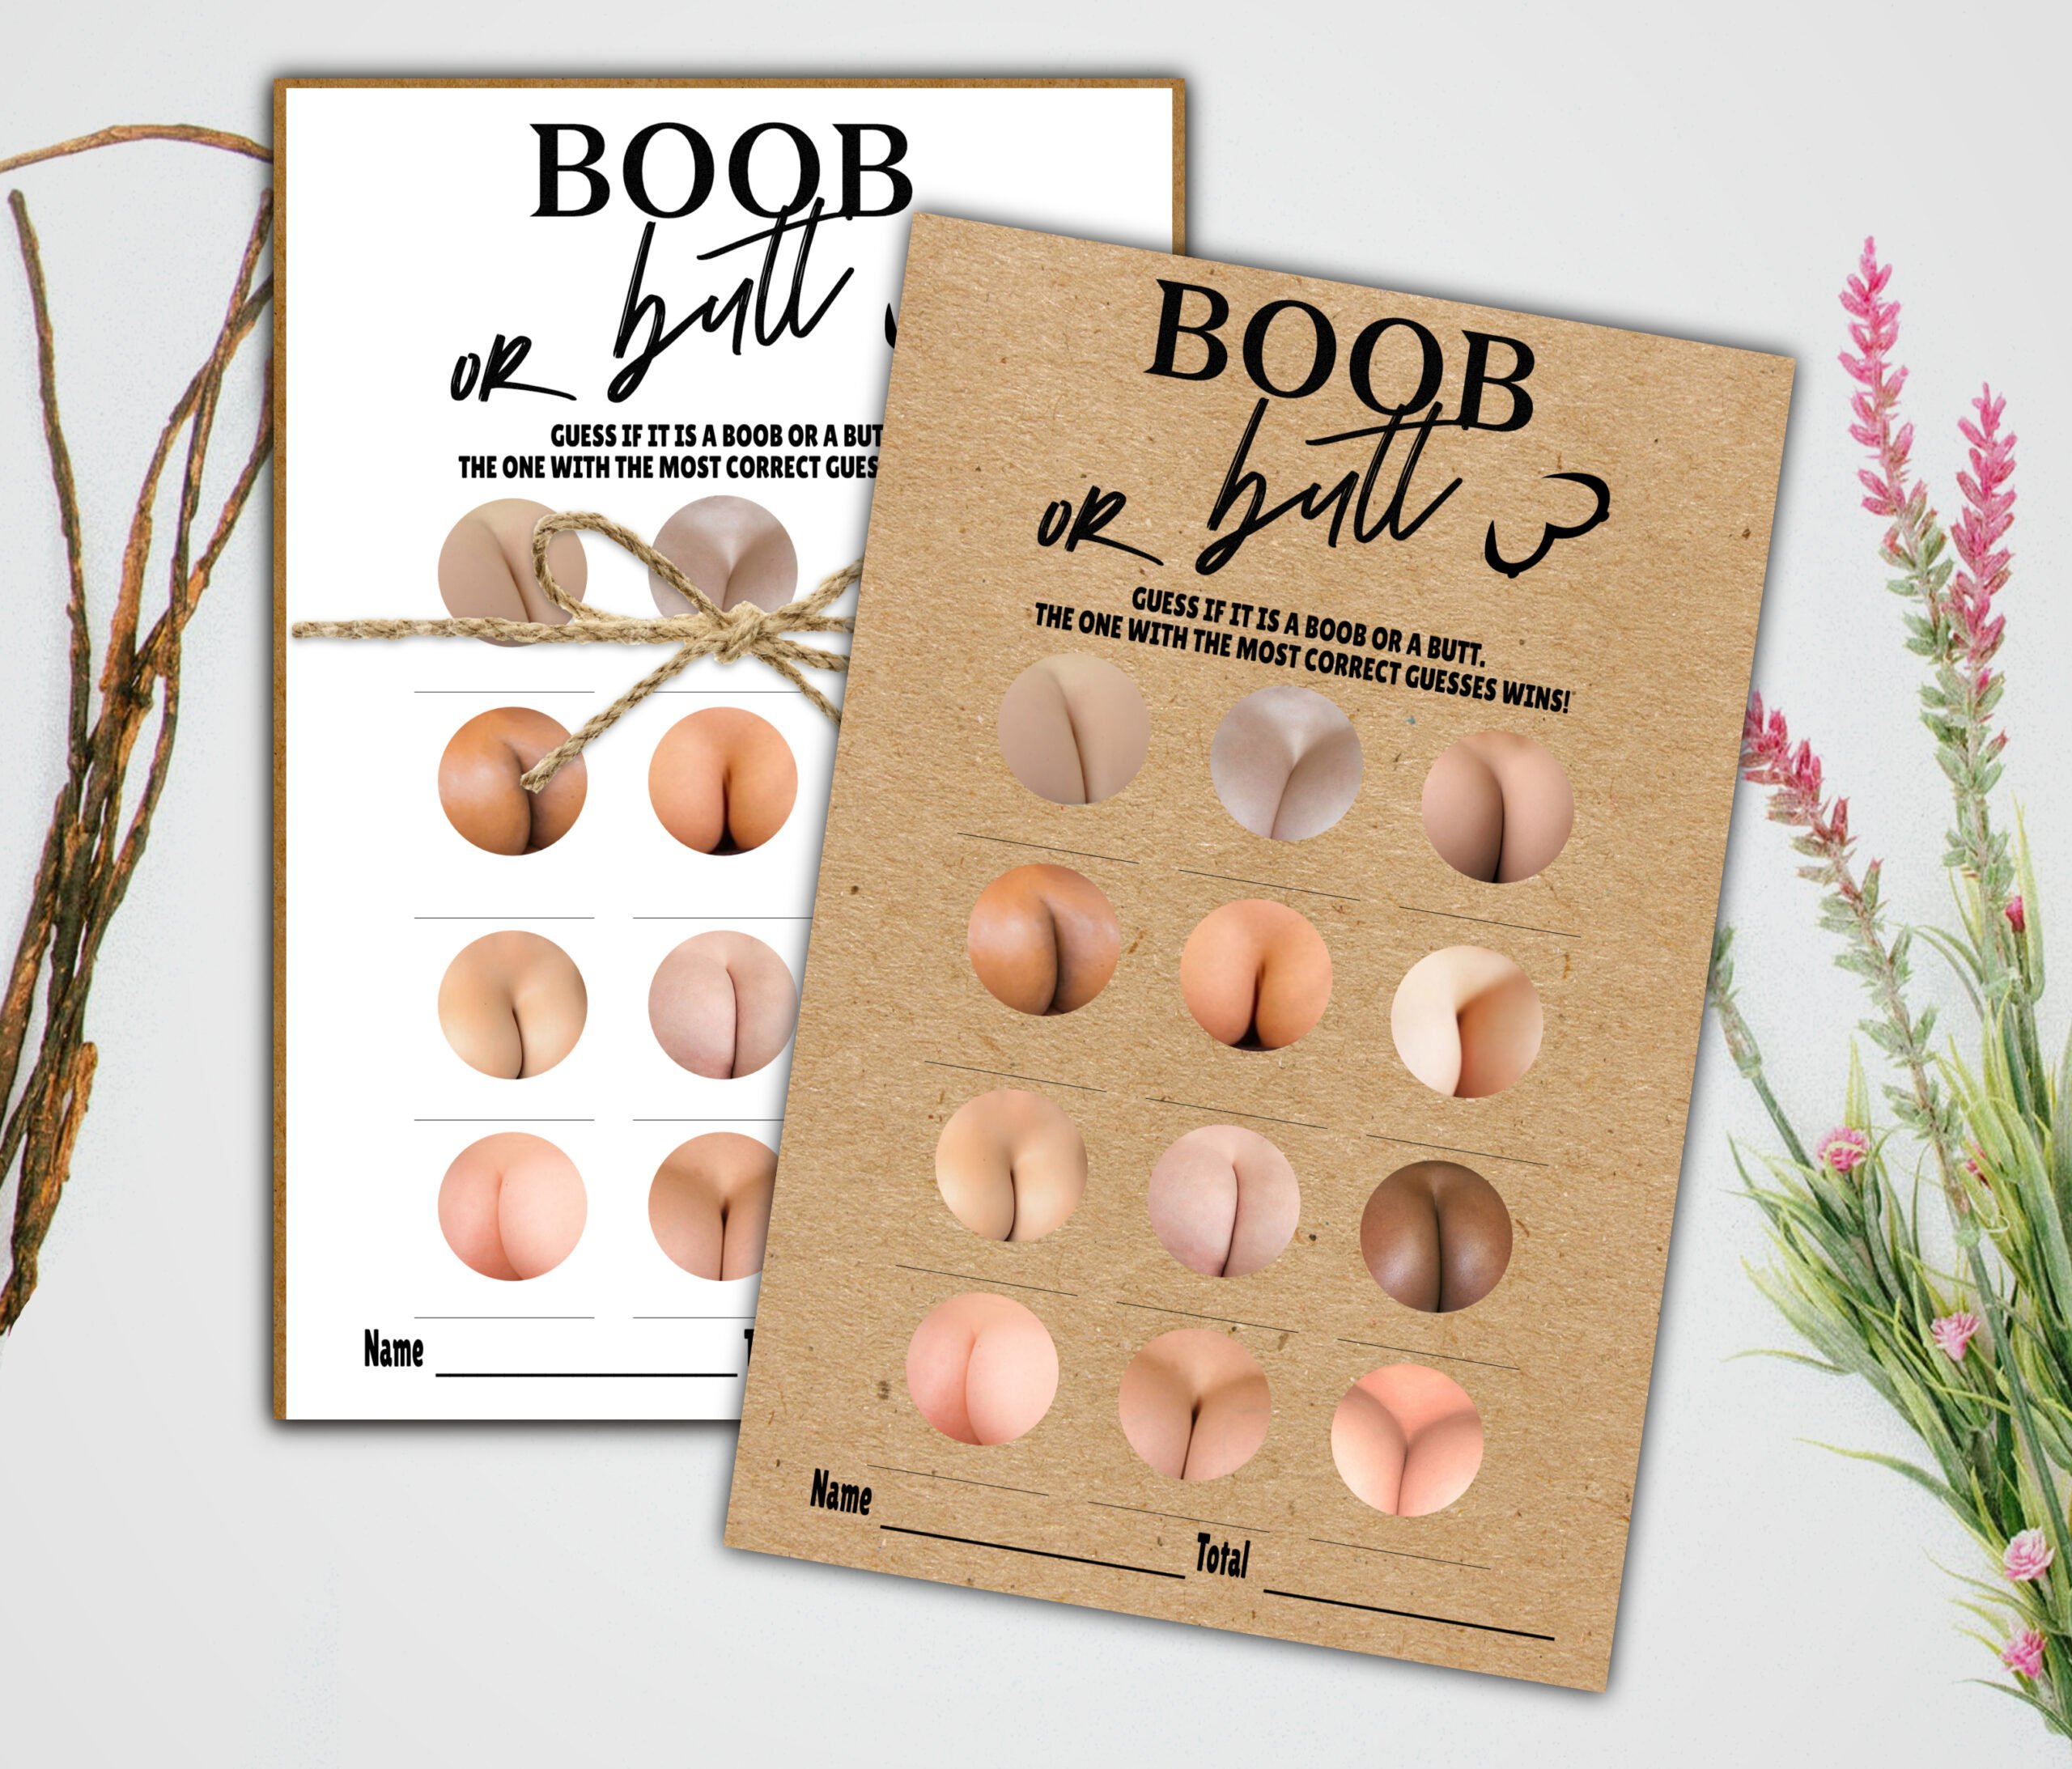 Bridal Shower Games Rustic Boob or Butt Dirty Adult Game Bachelorette Boob or Butt Game